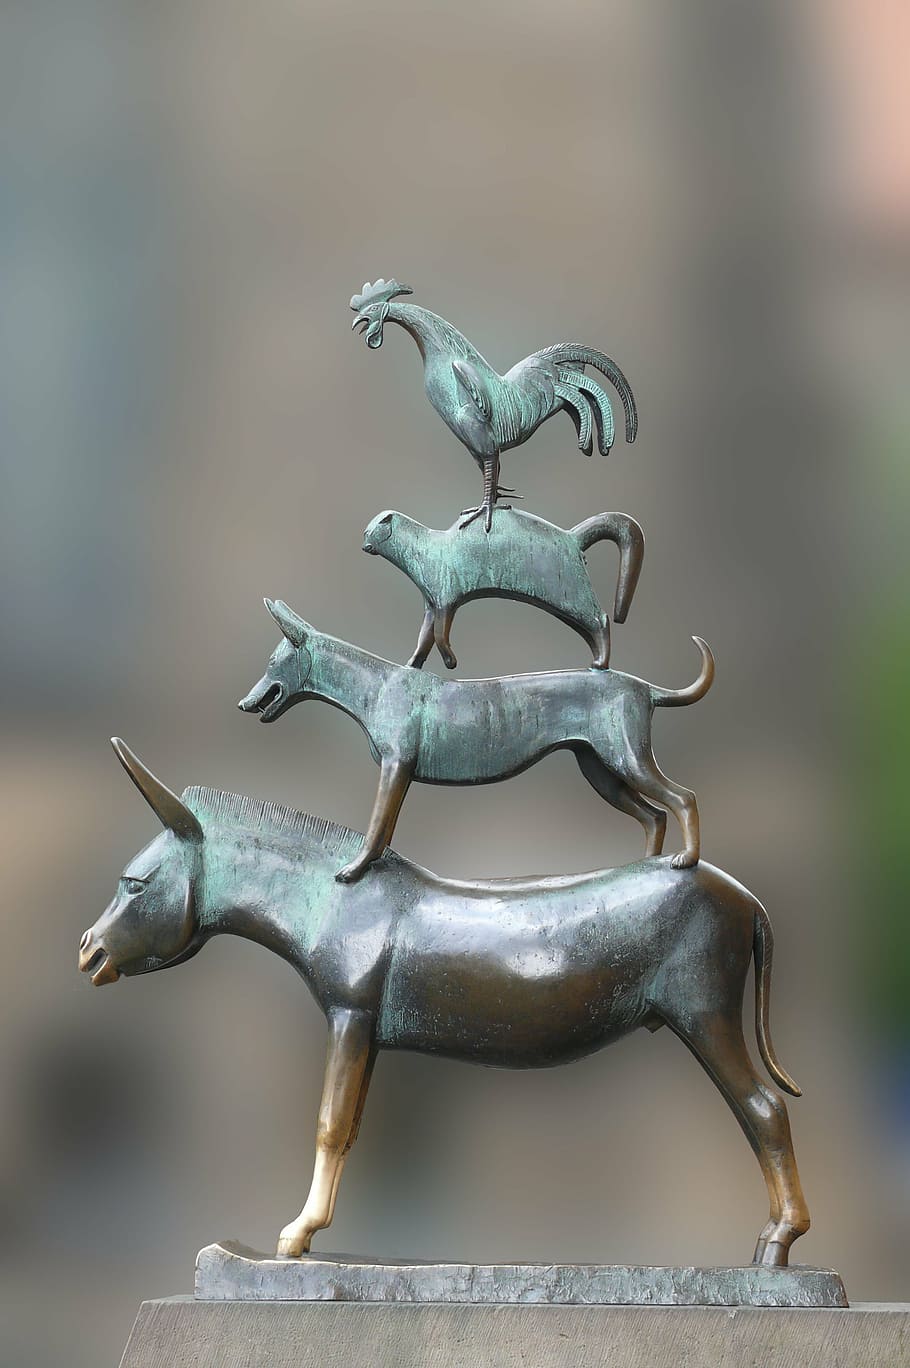 five assorted-animal figurine, bremen town musicians, monument, fairy tales, animals, fantasy, figure, fairy tale, donkey, dog